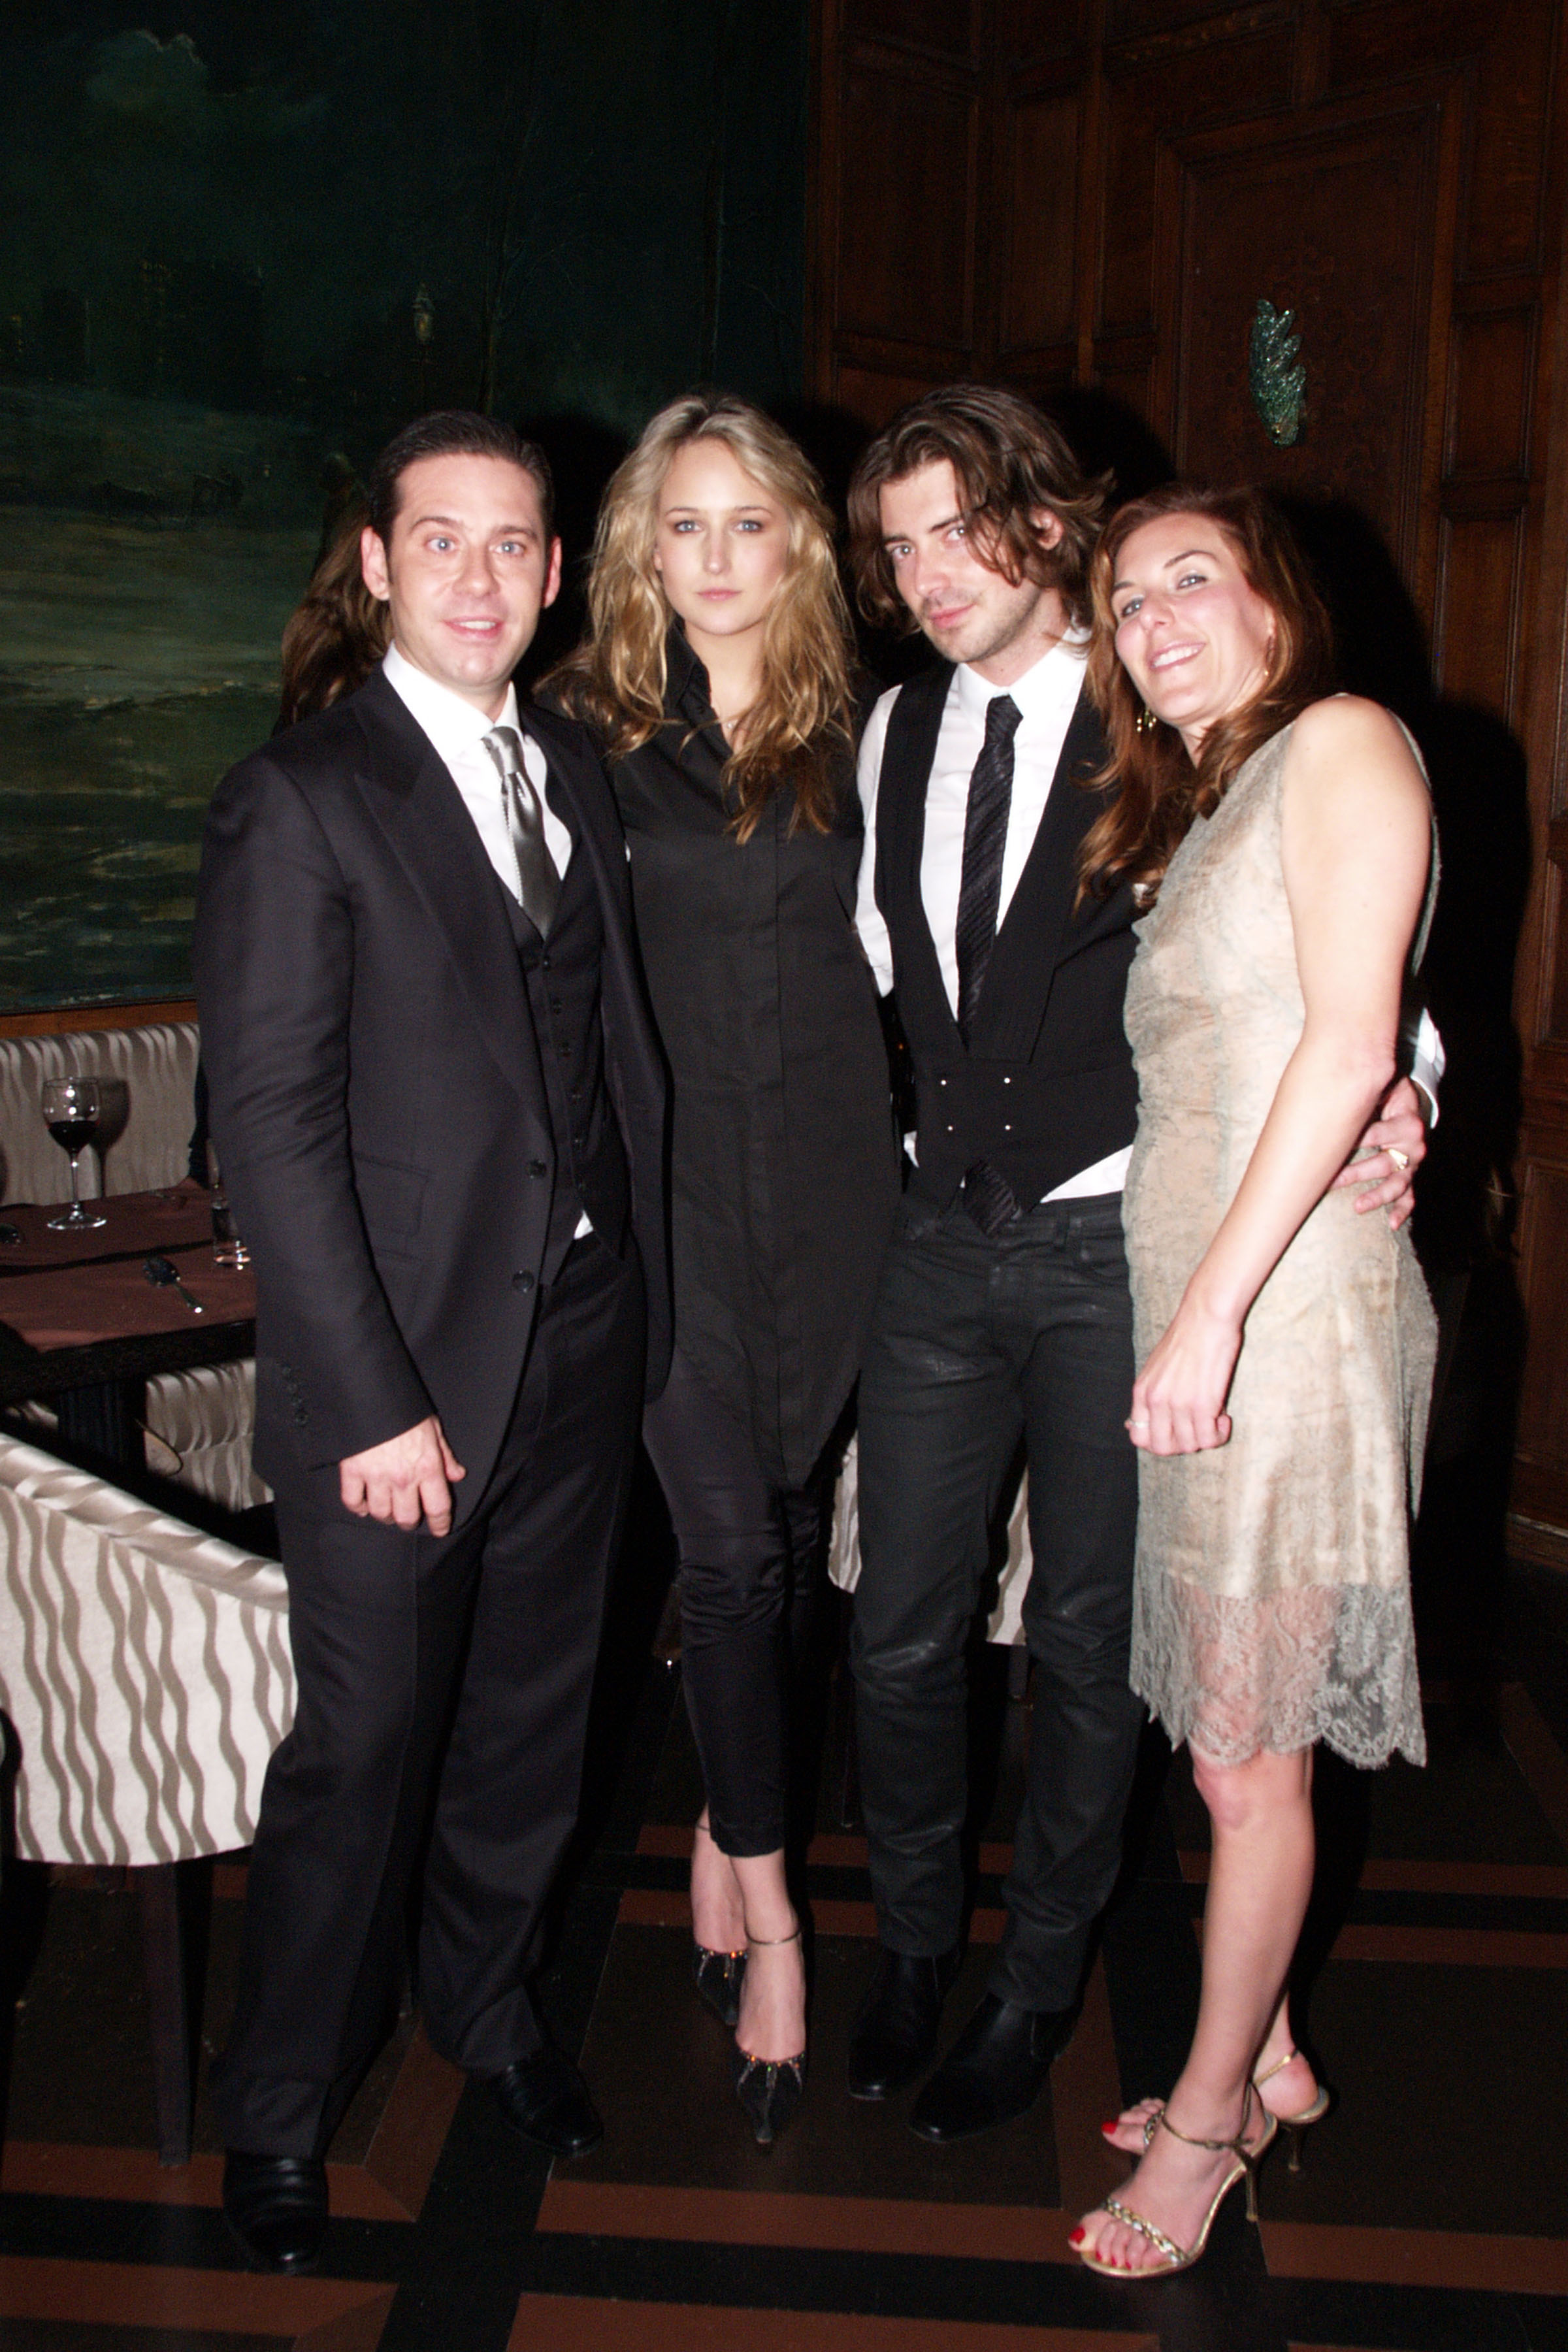 The Edmont Society Affair benefit. From left: Derek Anderson, LeeLee Sobieski, Victor Kent and Amy Berg.